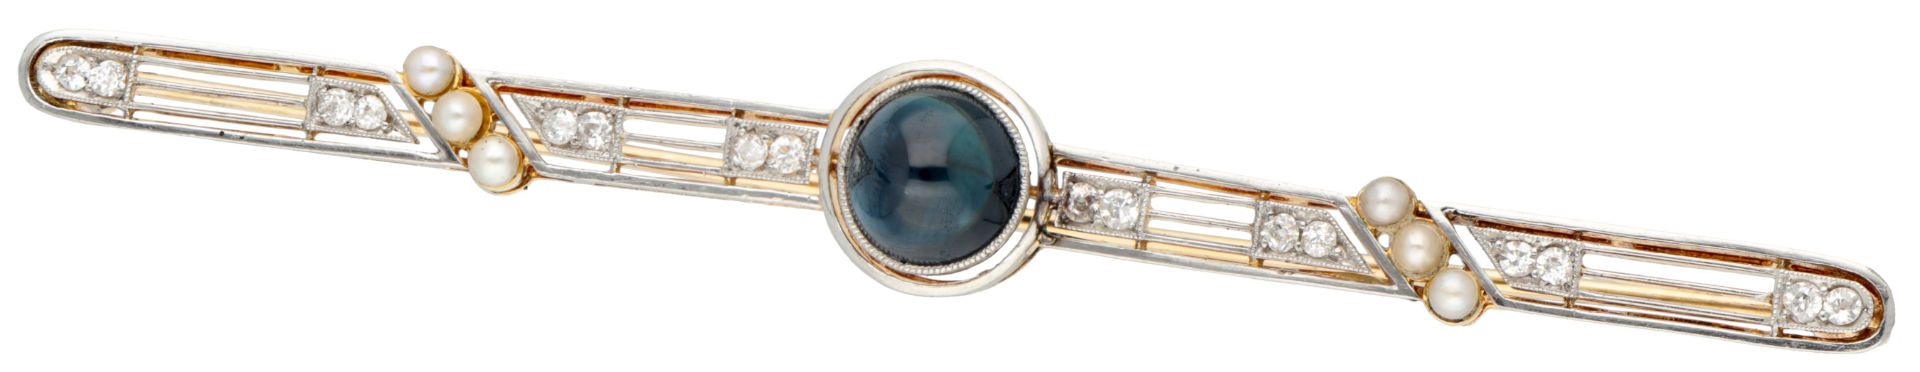 Art Deco yellow gold / platinum barrette brooch set with ca. 2.31 ct. natural sapphire, diamond and 